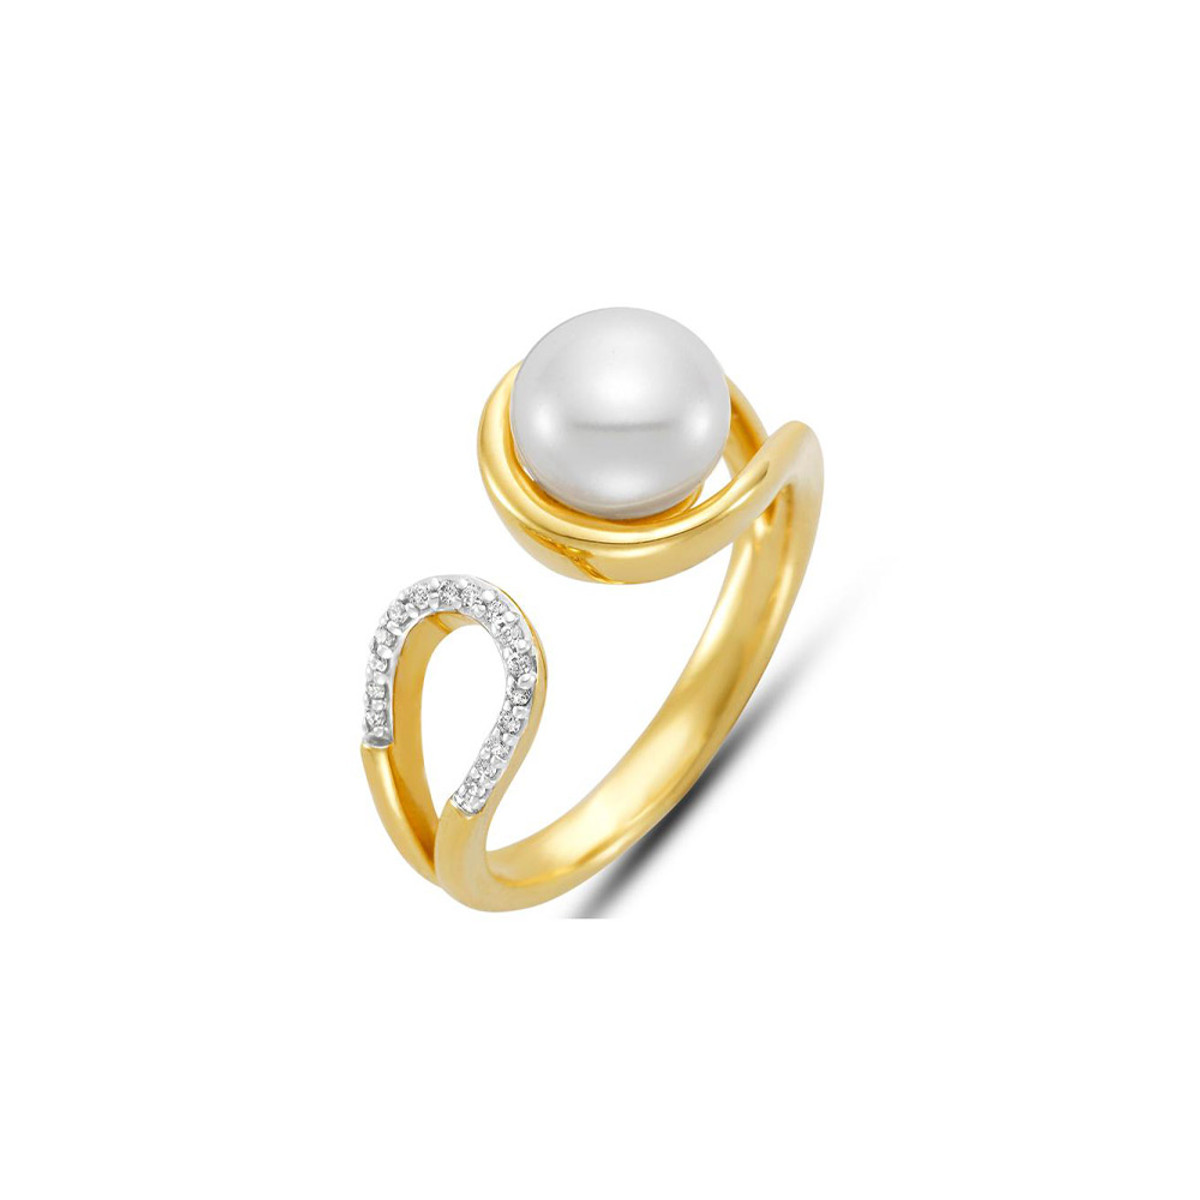 Hyde Park Collection 18K Yellow Gold Pearl and Diamond Ring-58547 Product Image